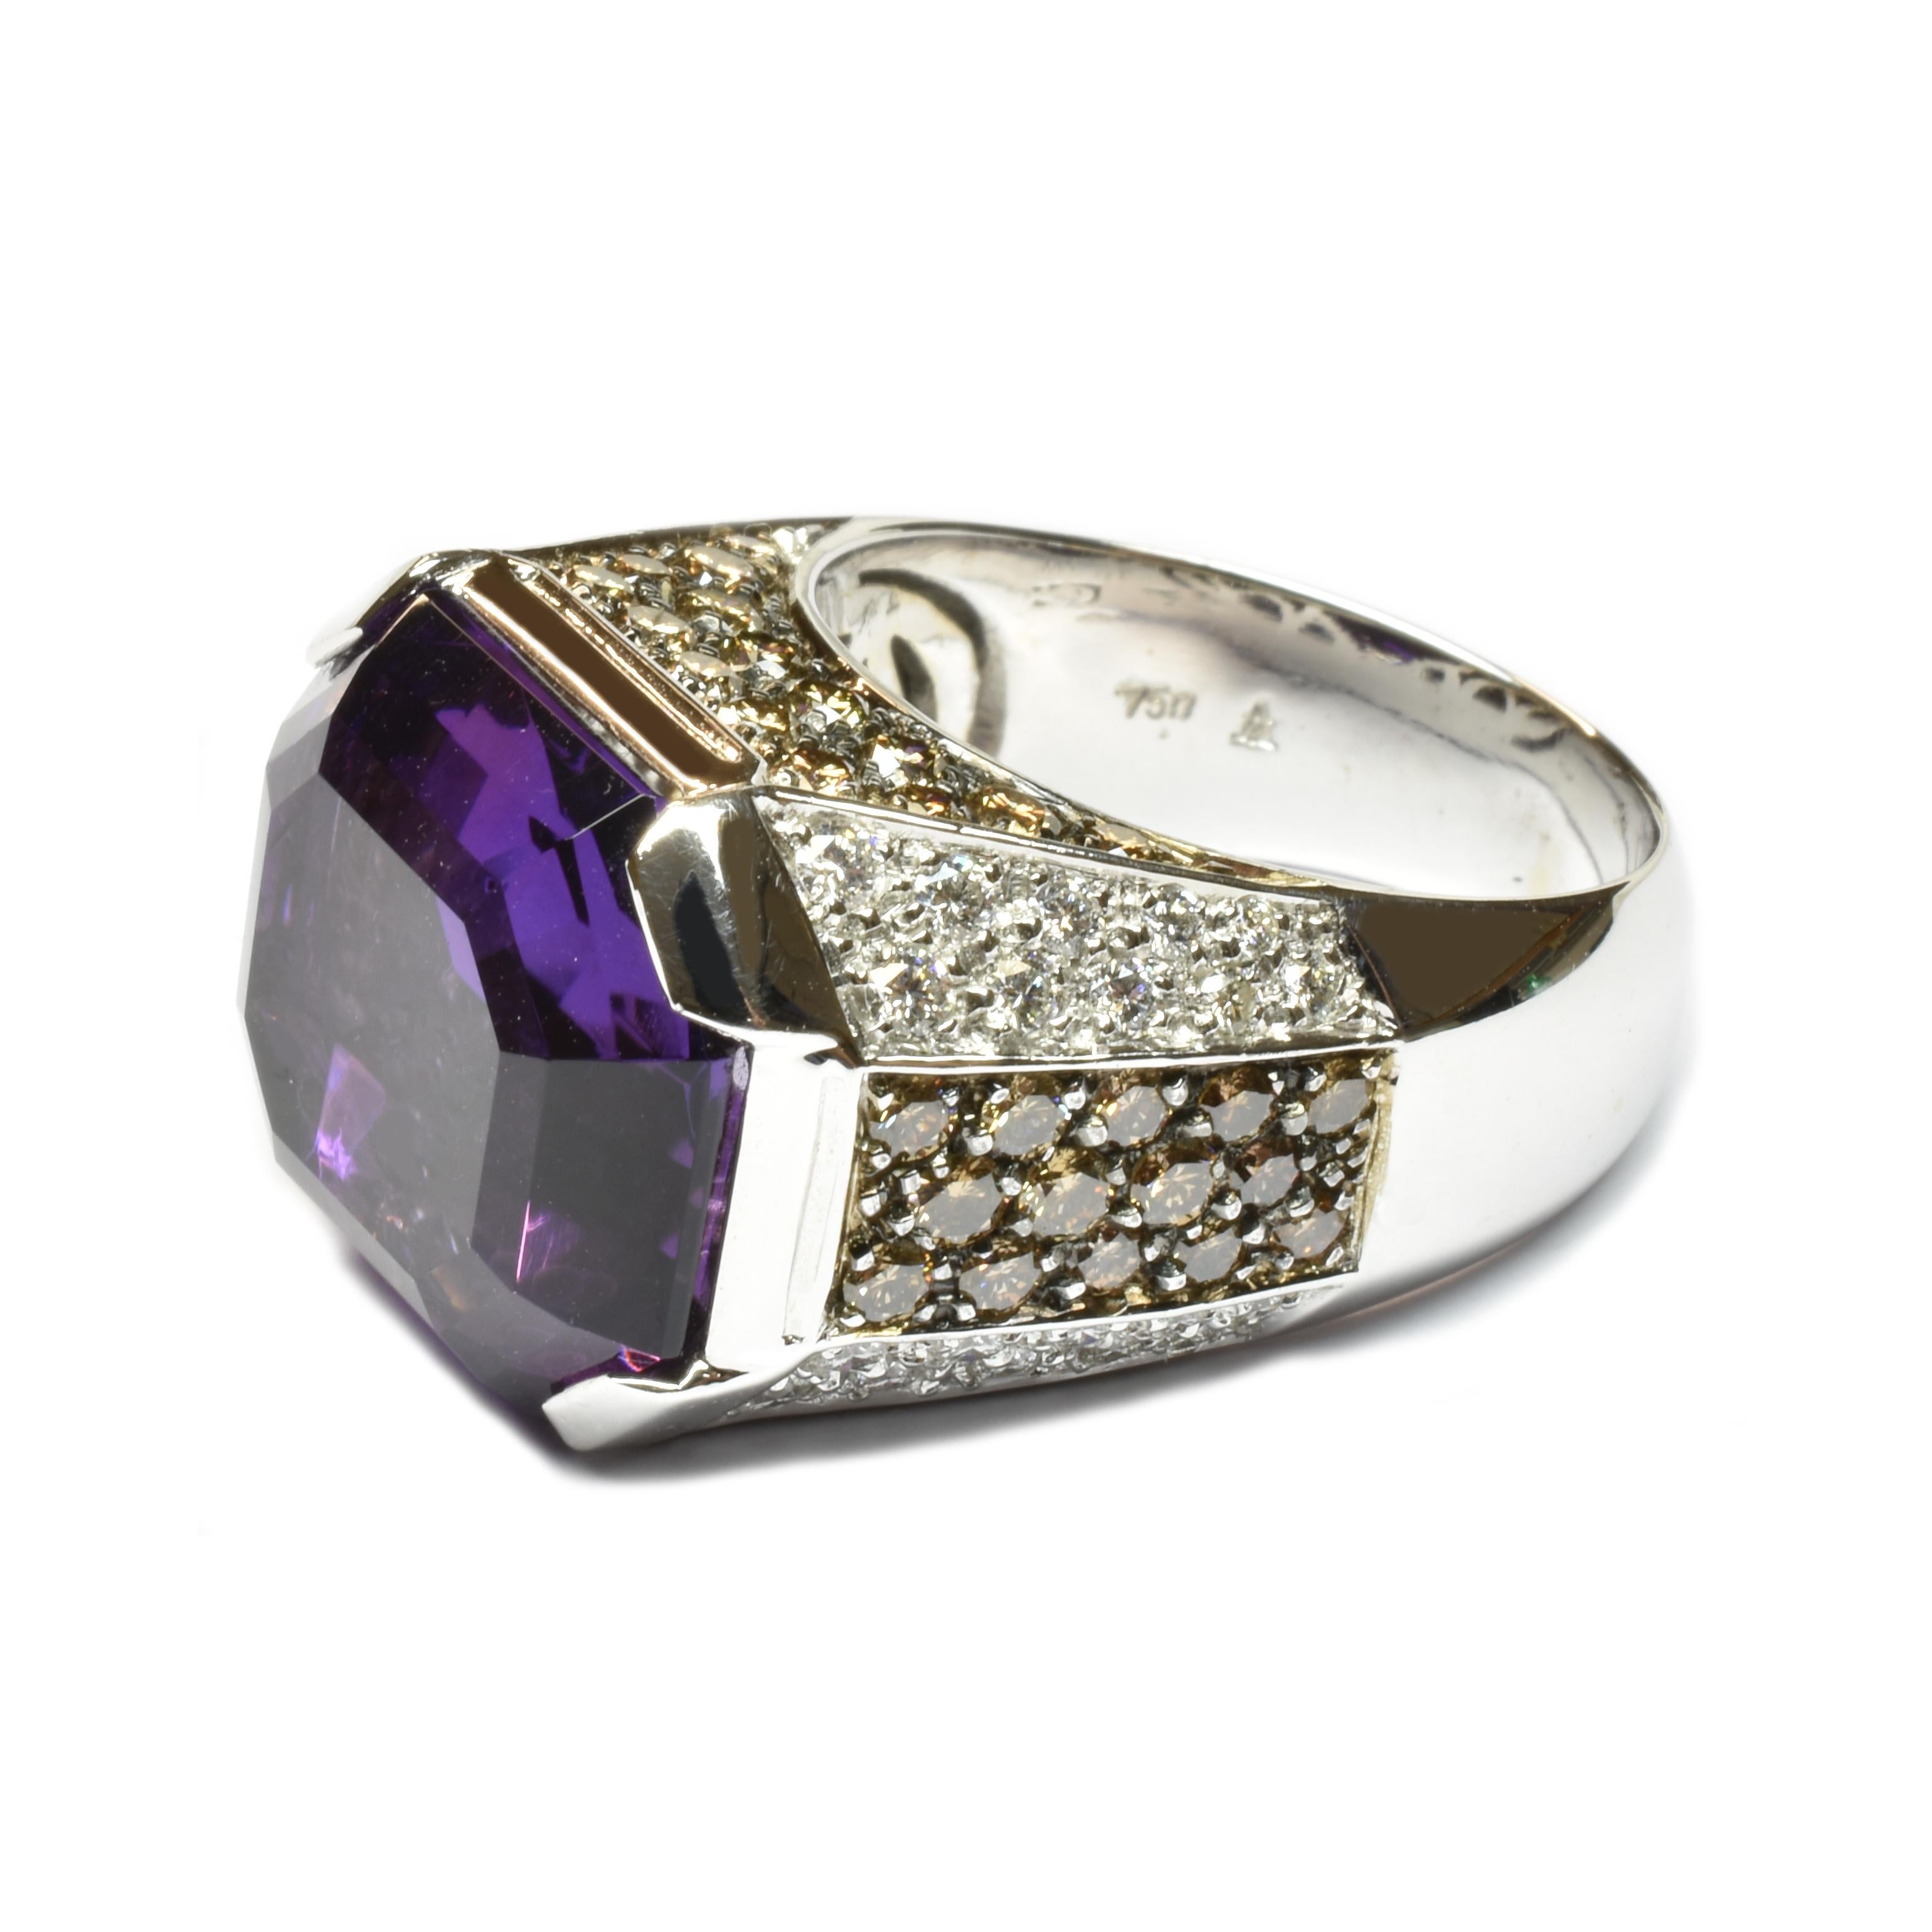 Gilberto Cassola 18Kt White Gold Ring with Octagonal Shaped Amethyst and White and Champagne Diamonds.
Octagonal Shaped Amethyst sized mm 16x14for a Weight of ct 12.11
Champagne Diamonds are set on Black Rhodium Plated 18Kt Gold.
A Classy and